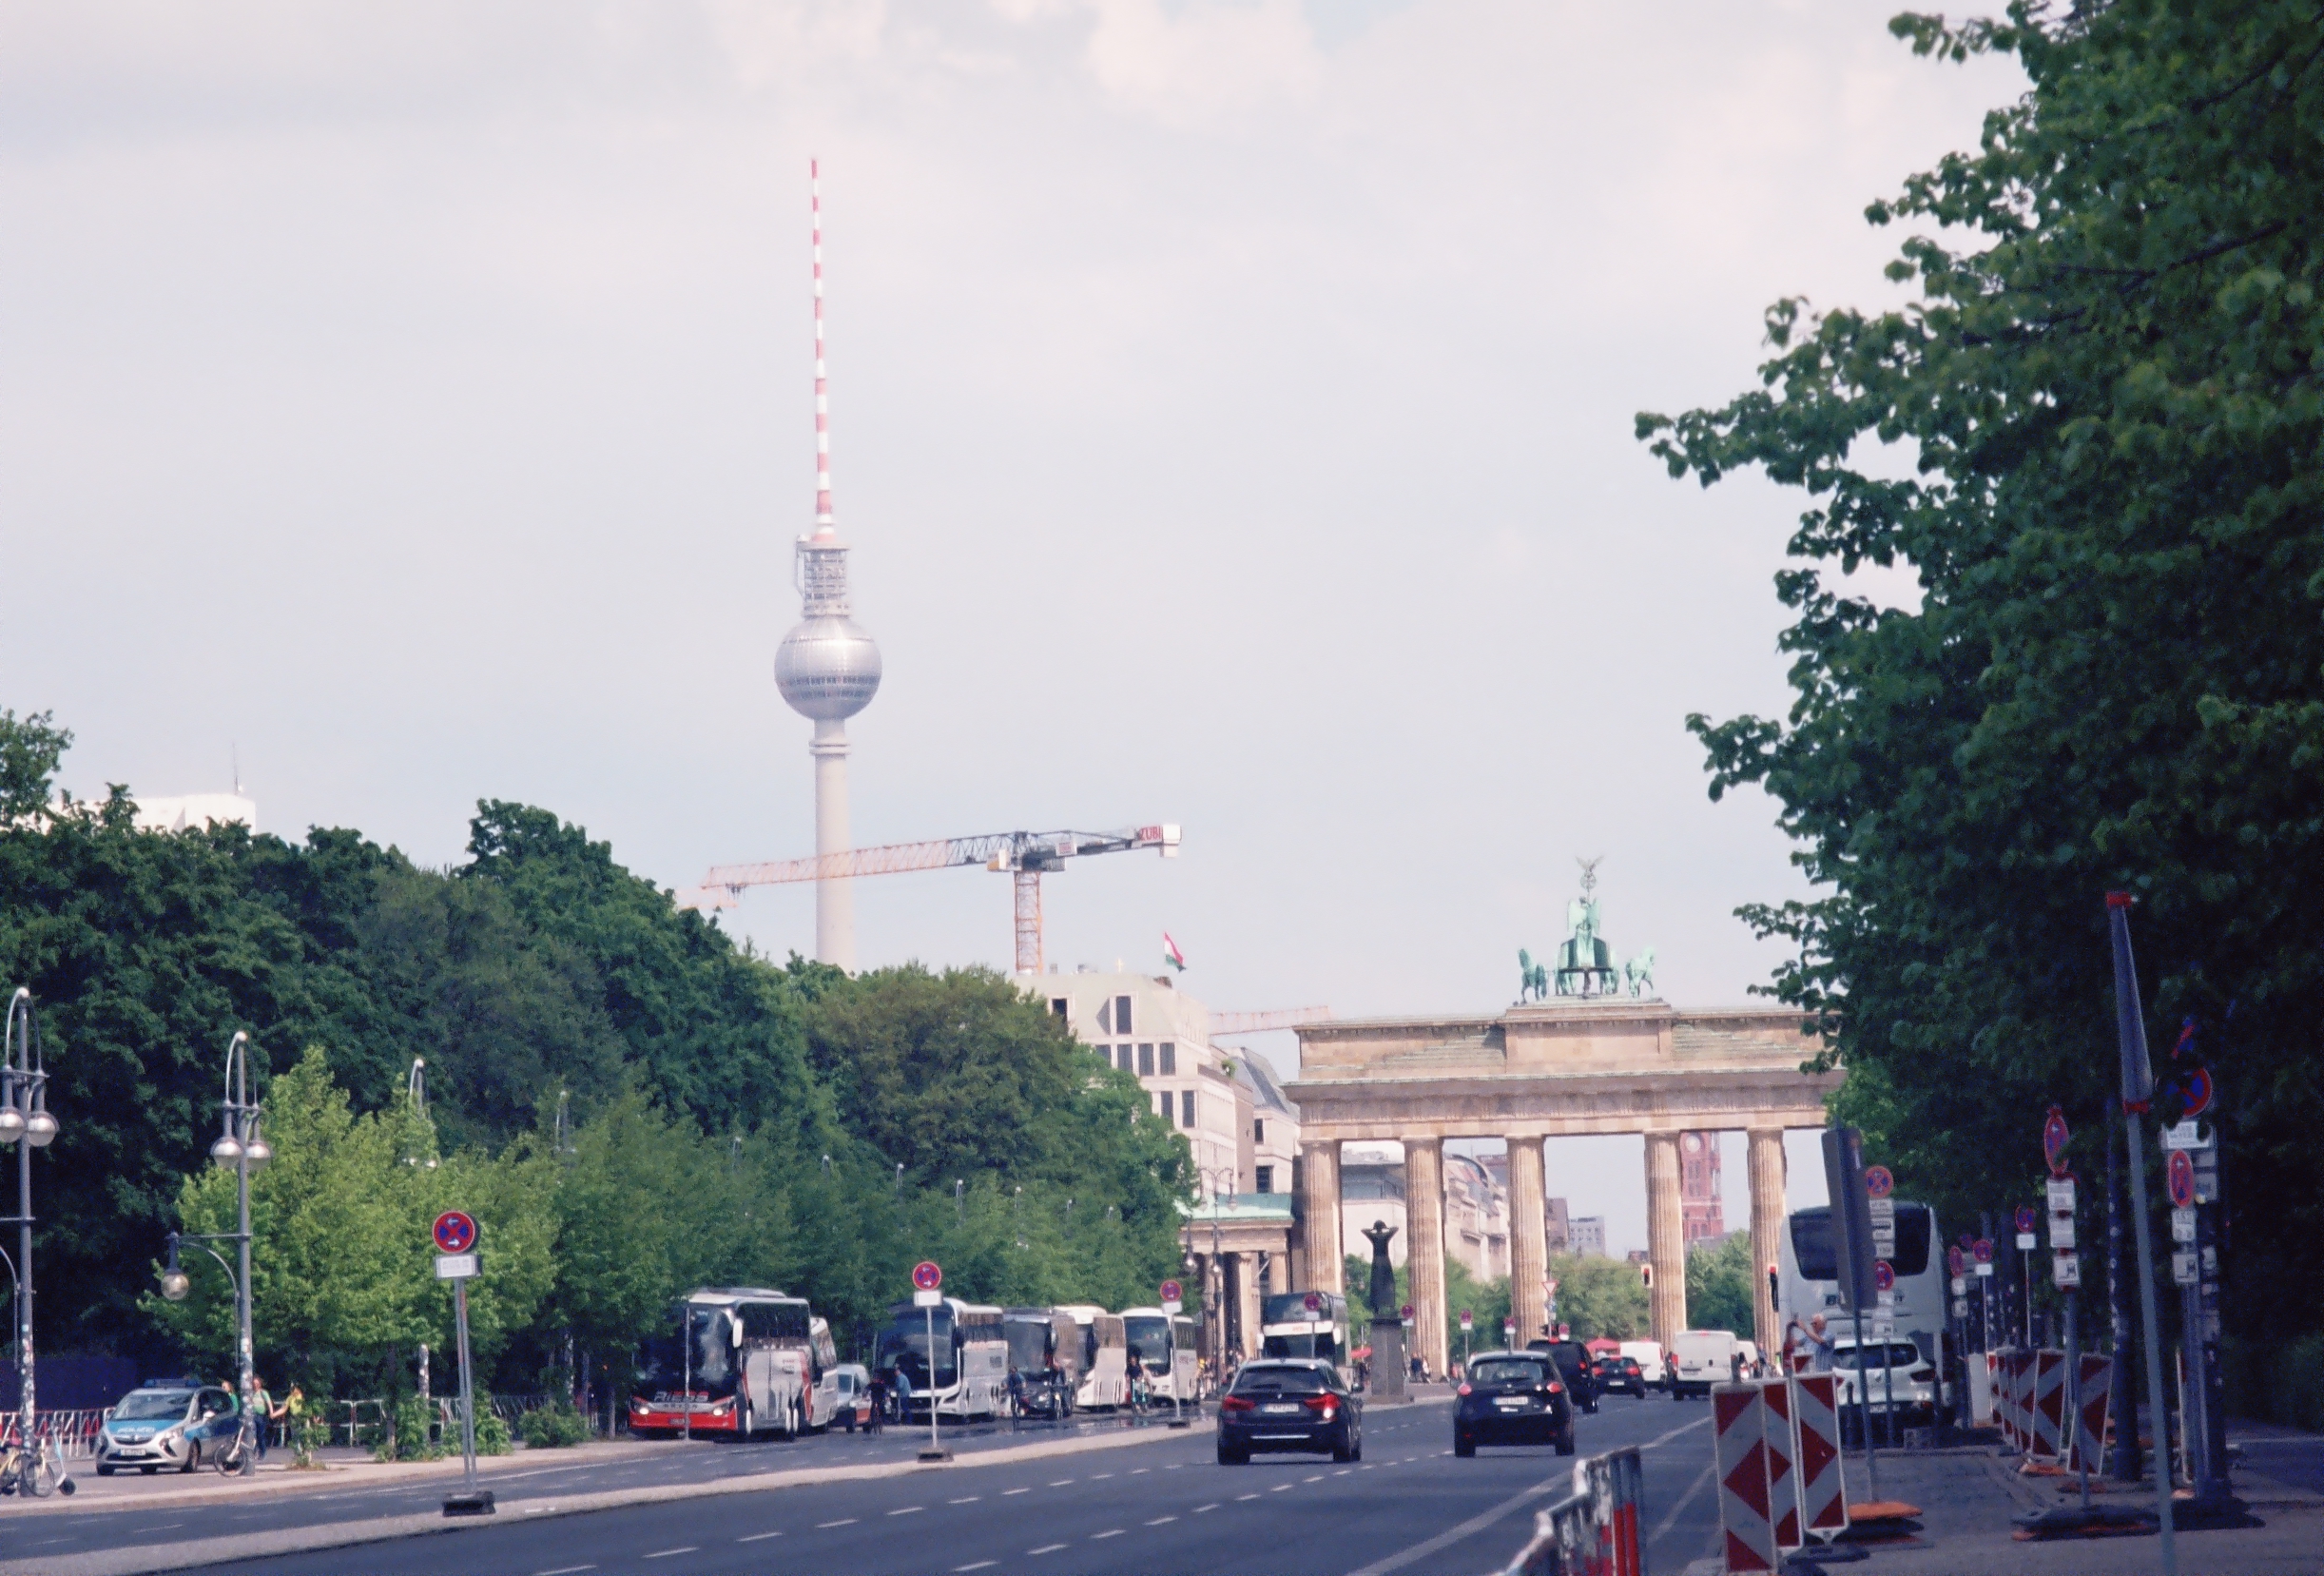 The Brandenburg Gate with the Tv Tower in the background